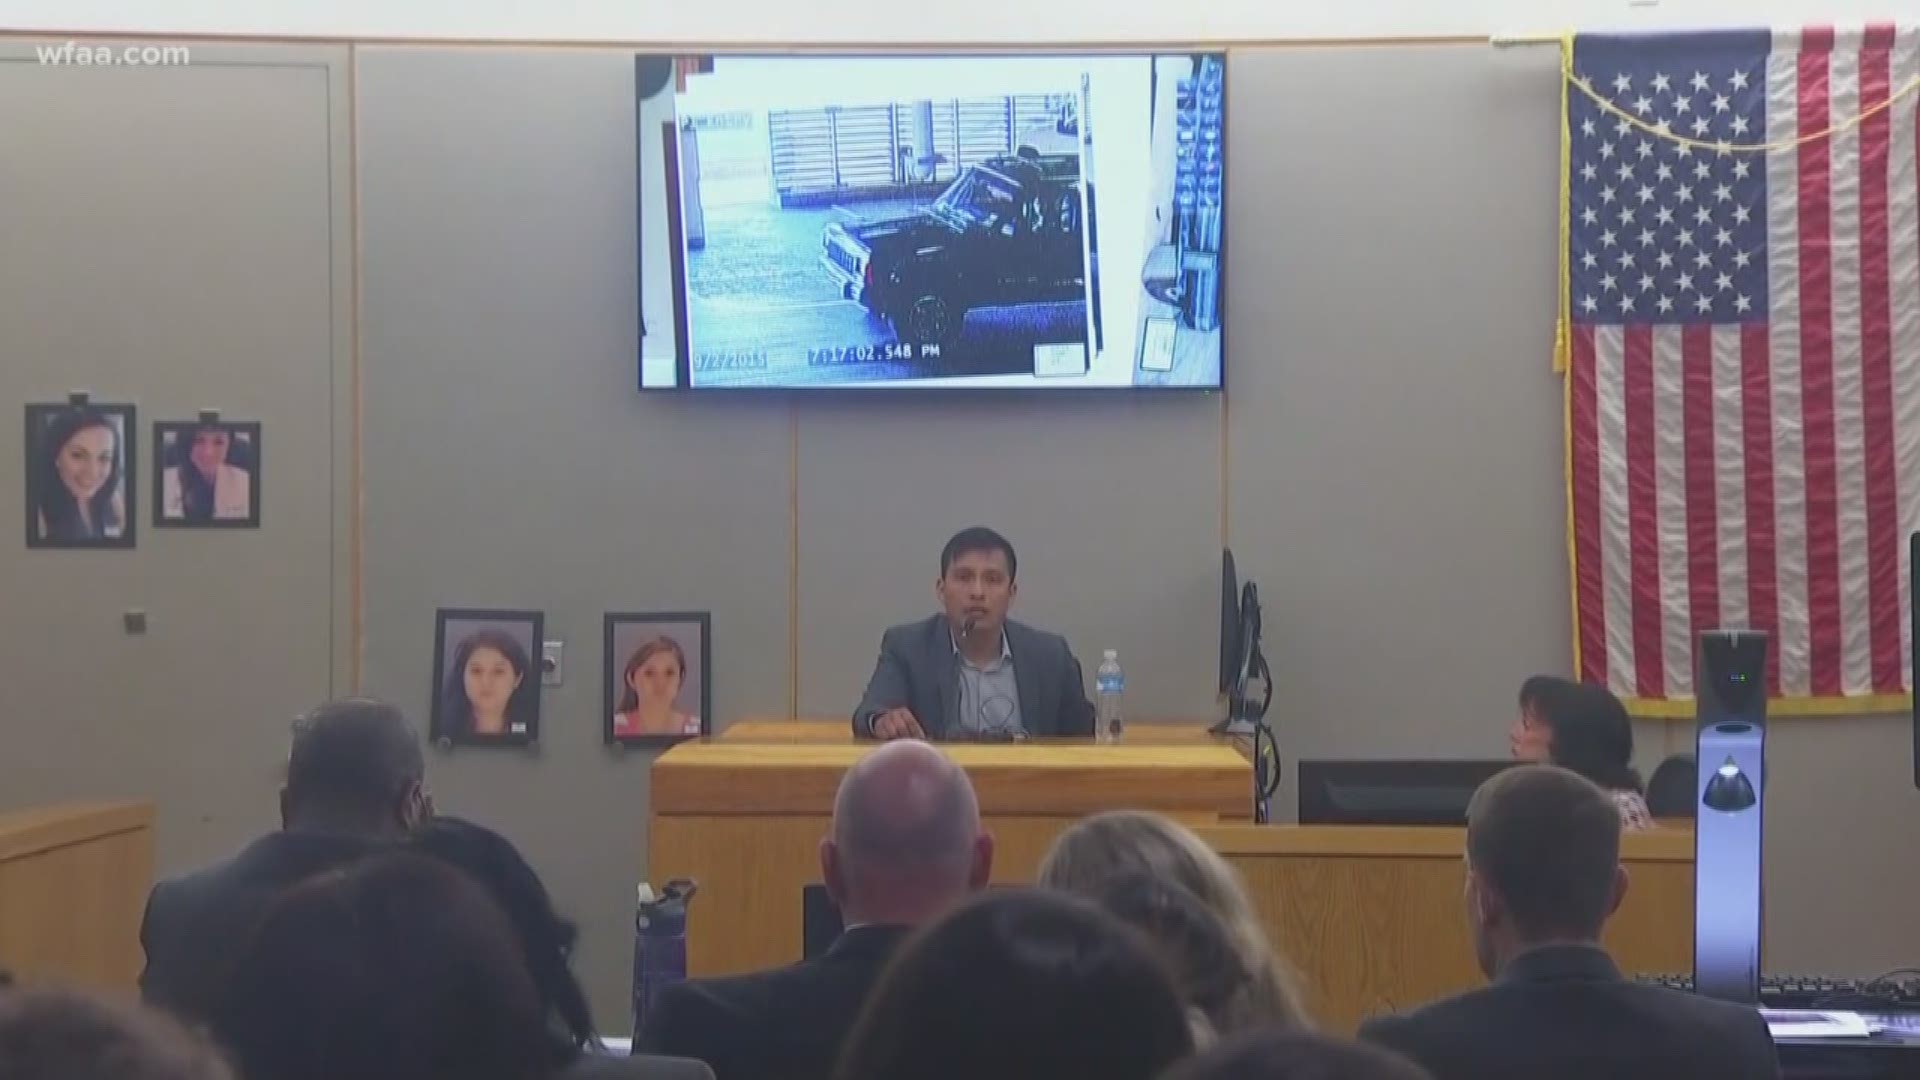 A best friend of Brenda Delgado said he "felt used" that his Jeep Cherokee was used during the killing of dentist Kendra Hatcher.